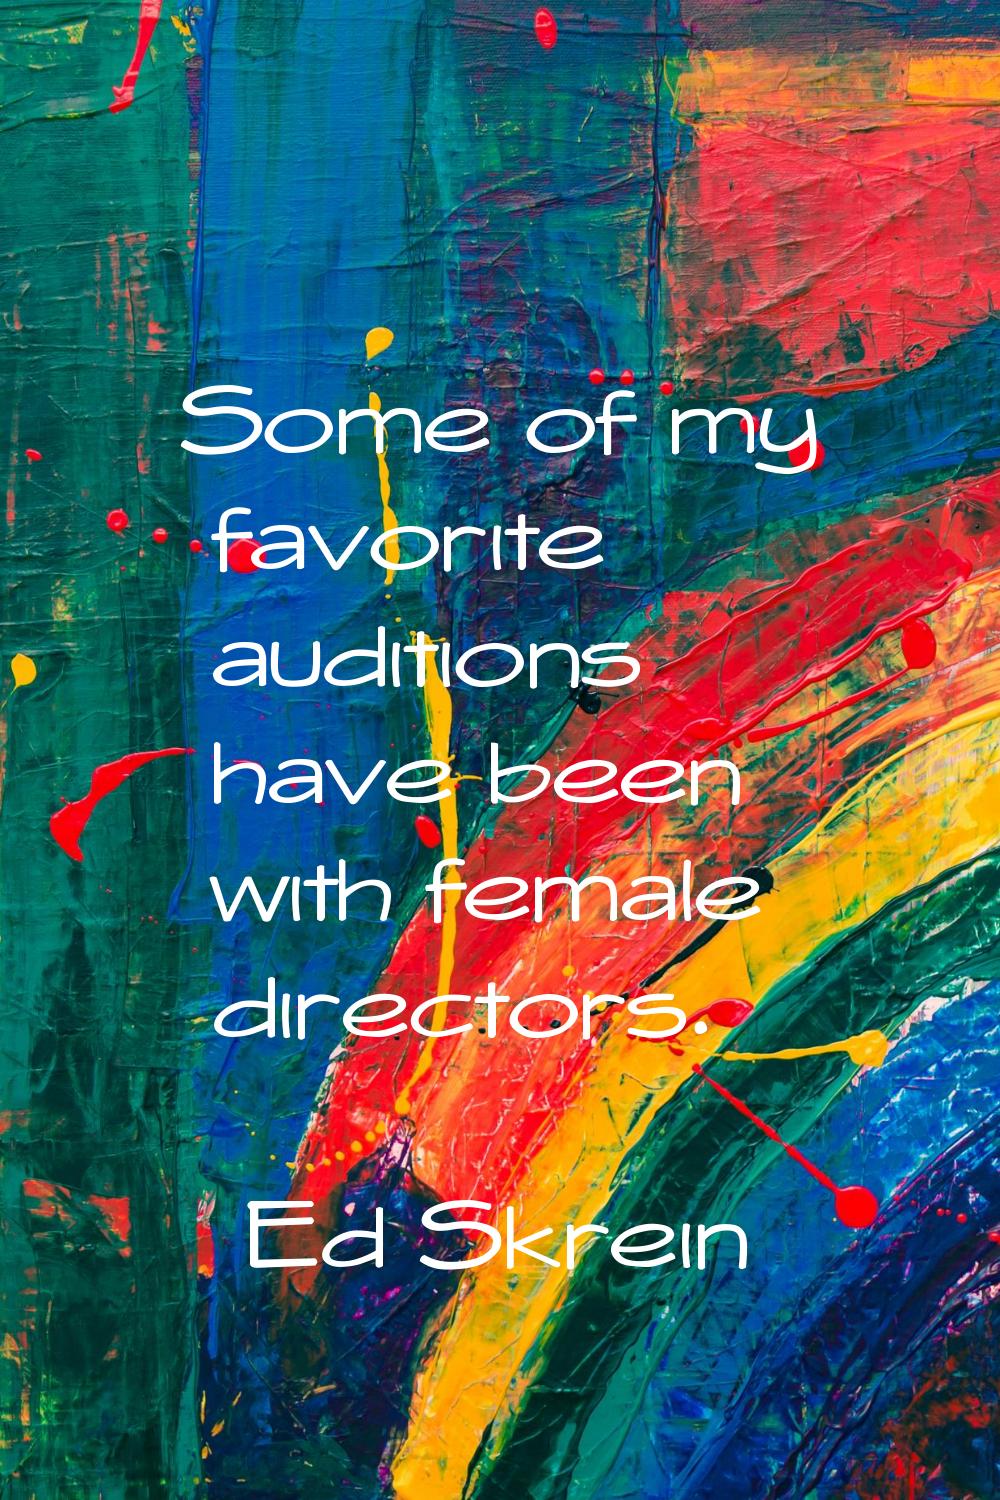 Some of my favorite auditions have been with female directors.